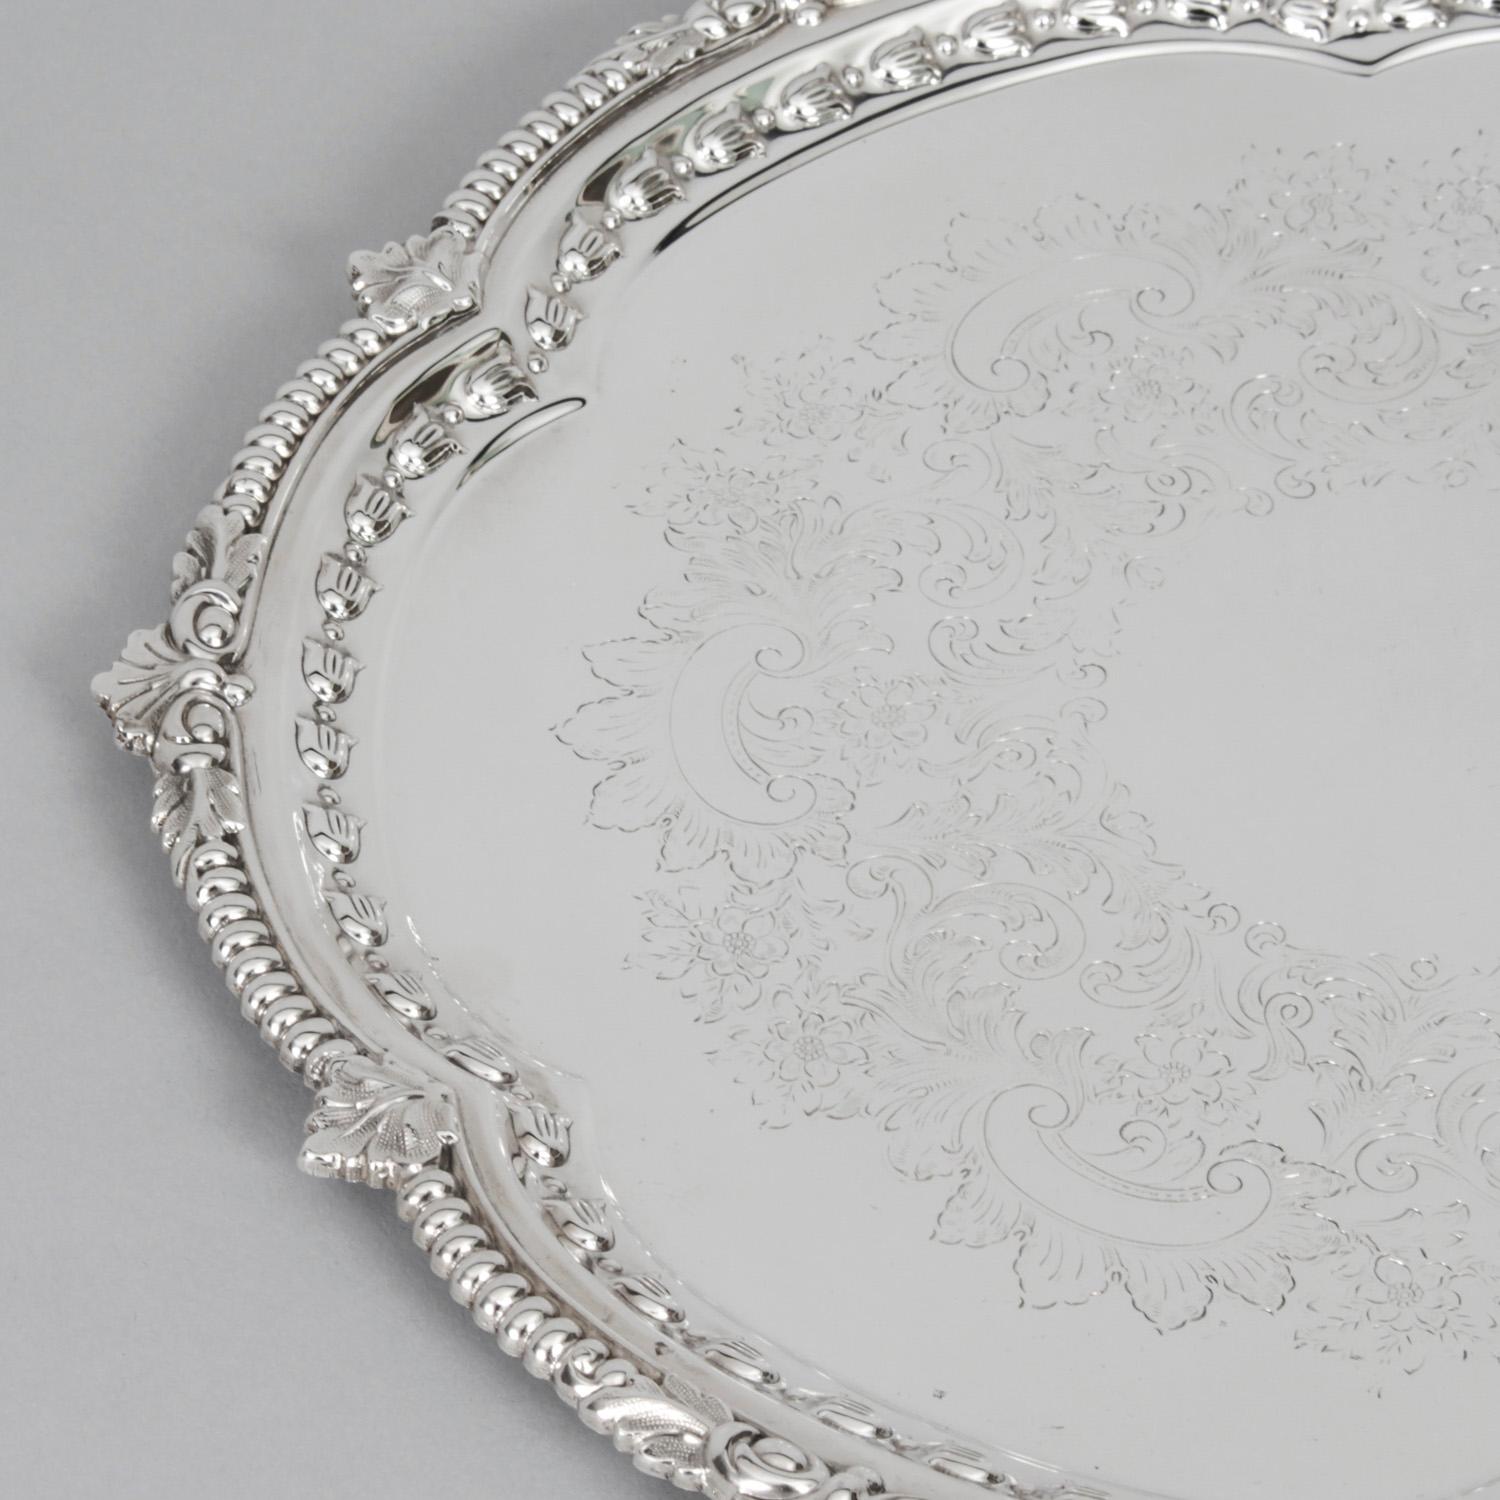 Late 19th Century Antique English Victorian Silver Plated Salver Barker Ellis, 19th Century